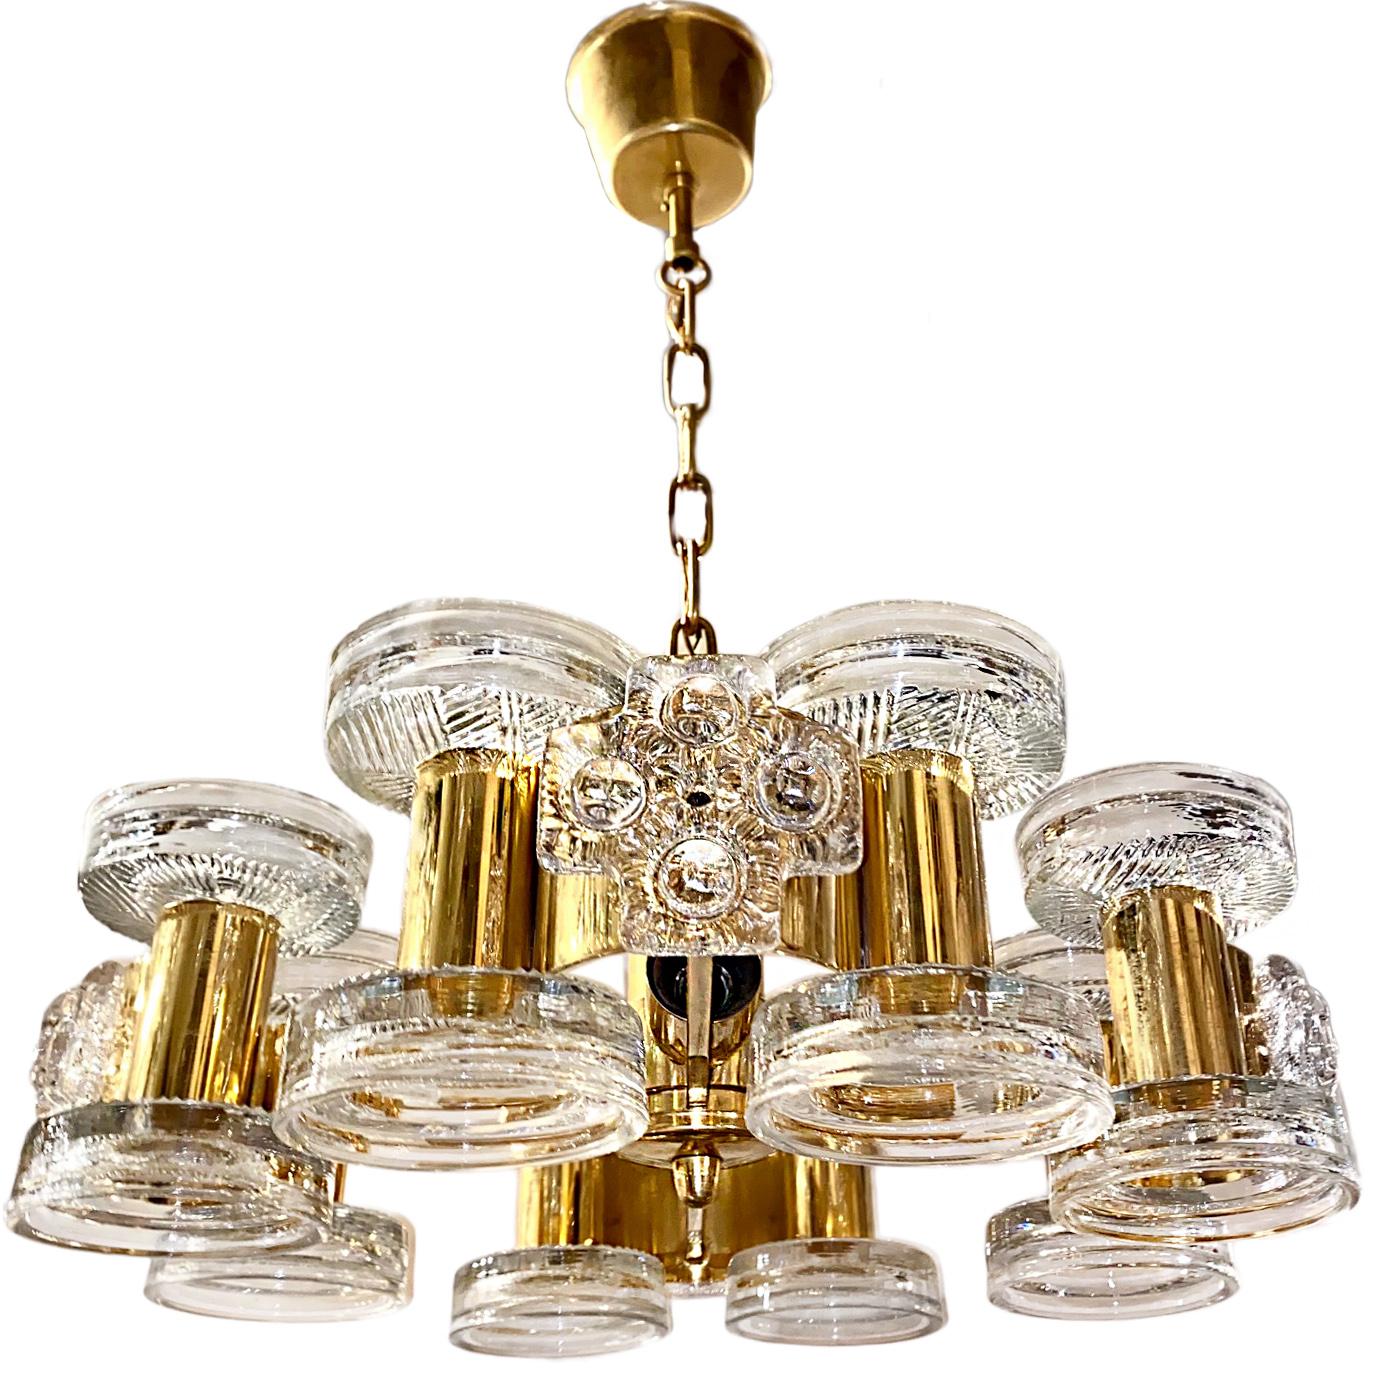 A Swedish moderne glass and bronze chandelier with interior lights, circa 1960s. Molded glass pieces insets throughout the body.
Pristine condition, rewired.

Measurements:
15.75